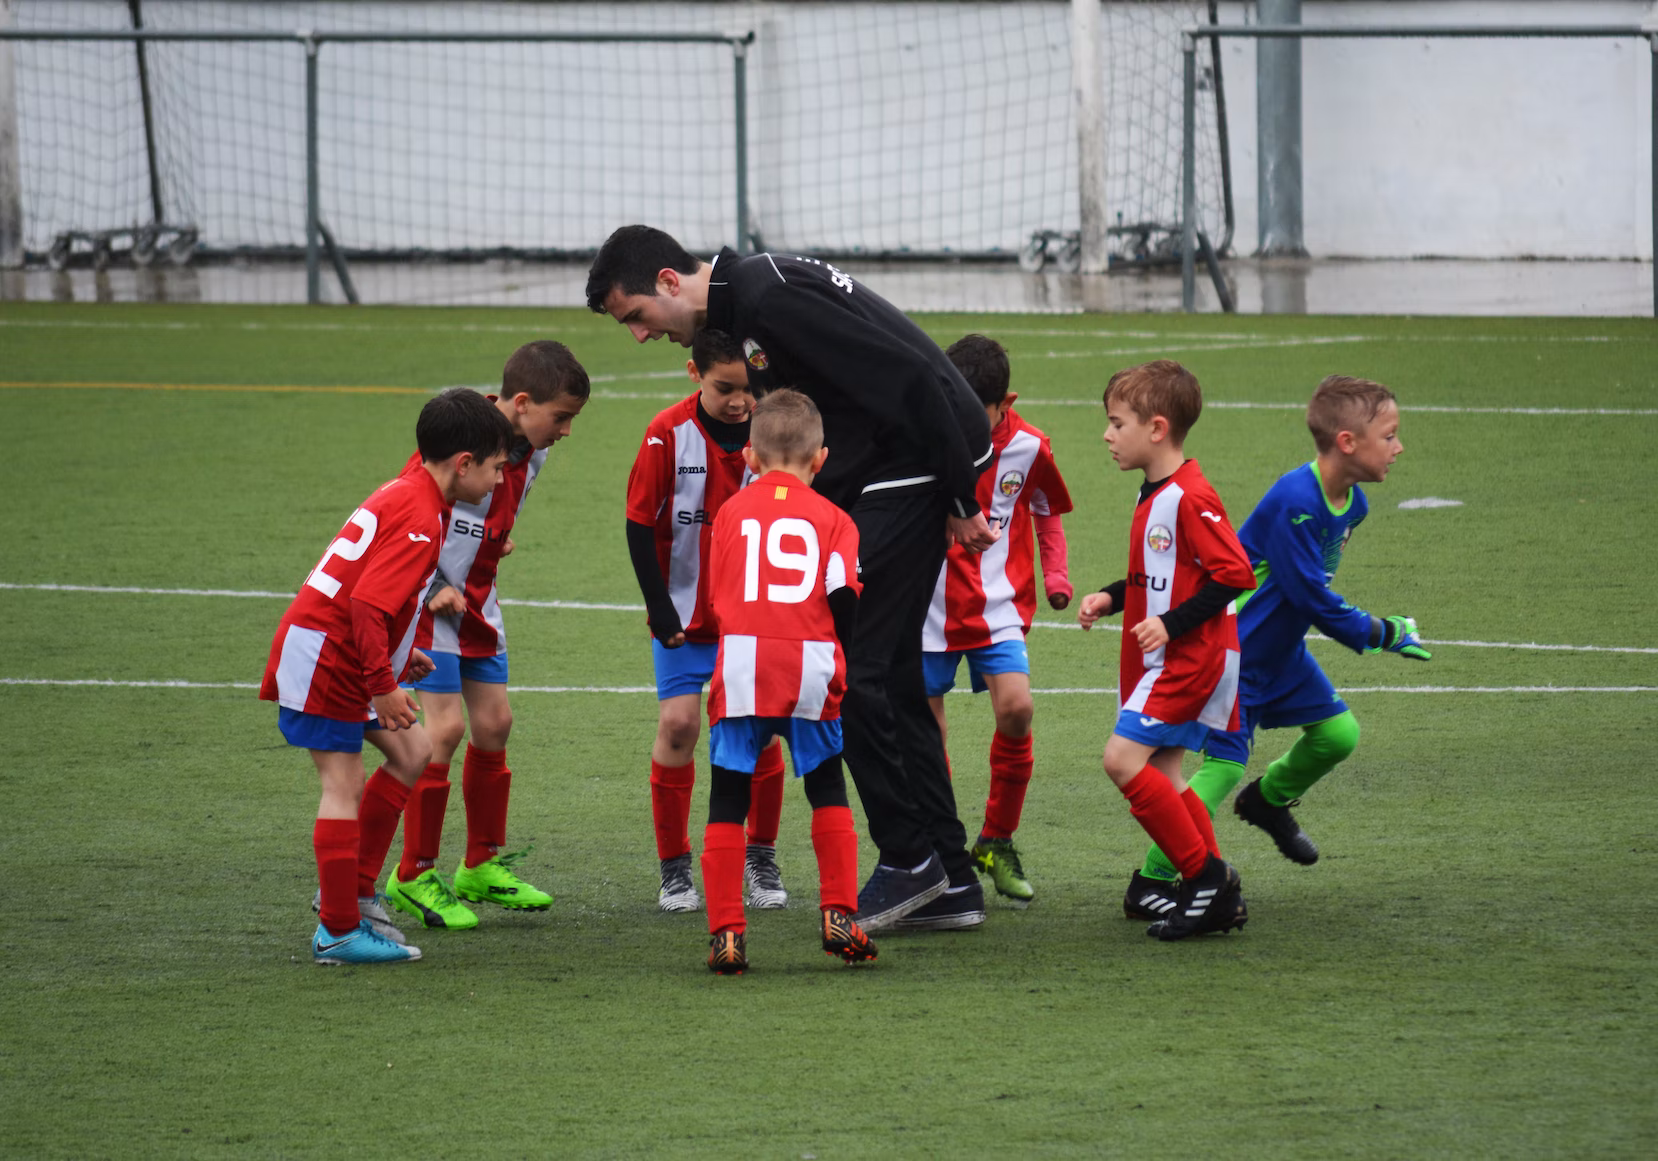 How Data Can Be Used to Help Youth Soccer Clubs